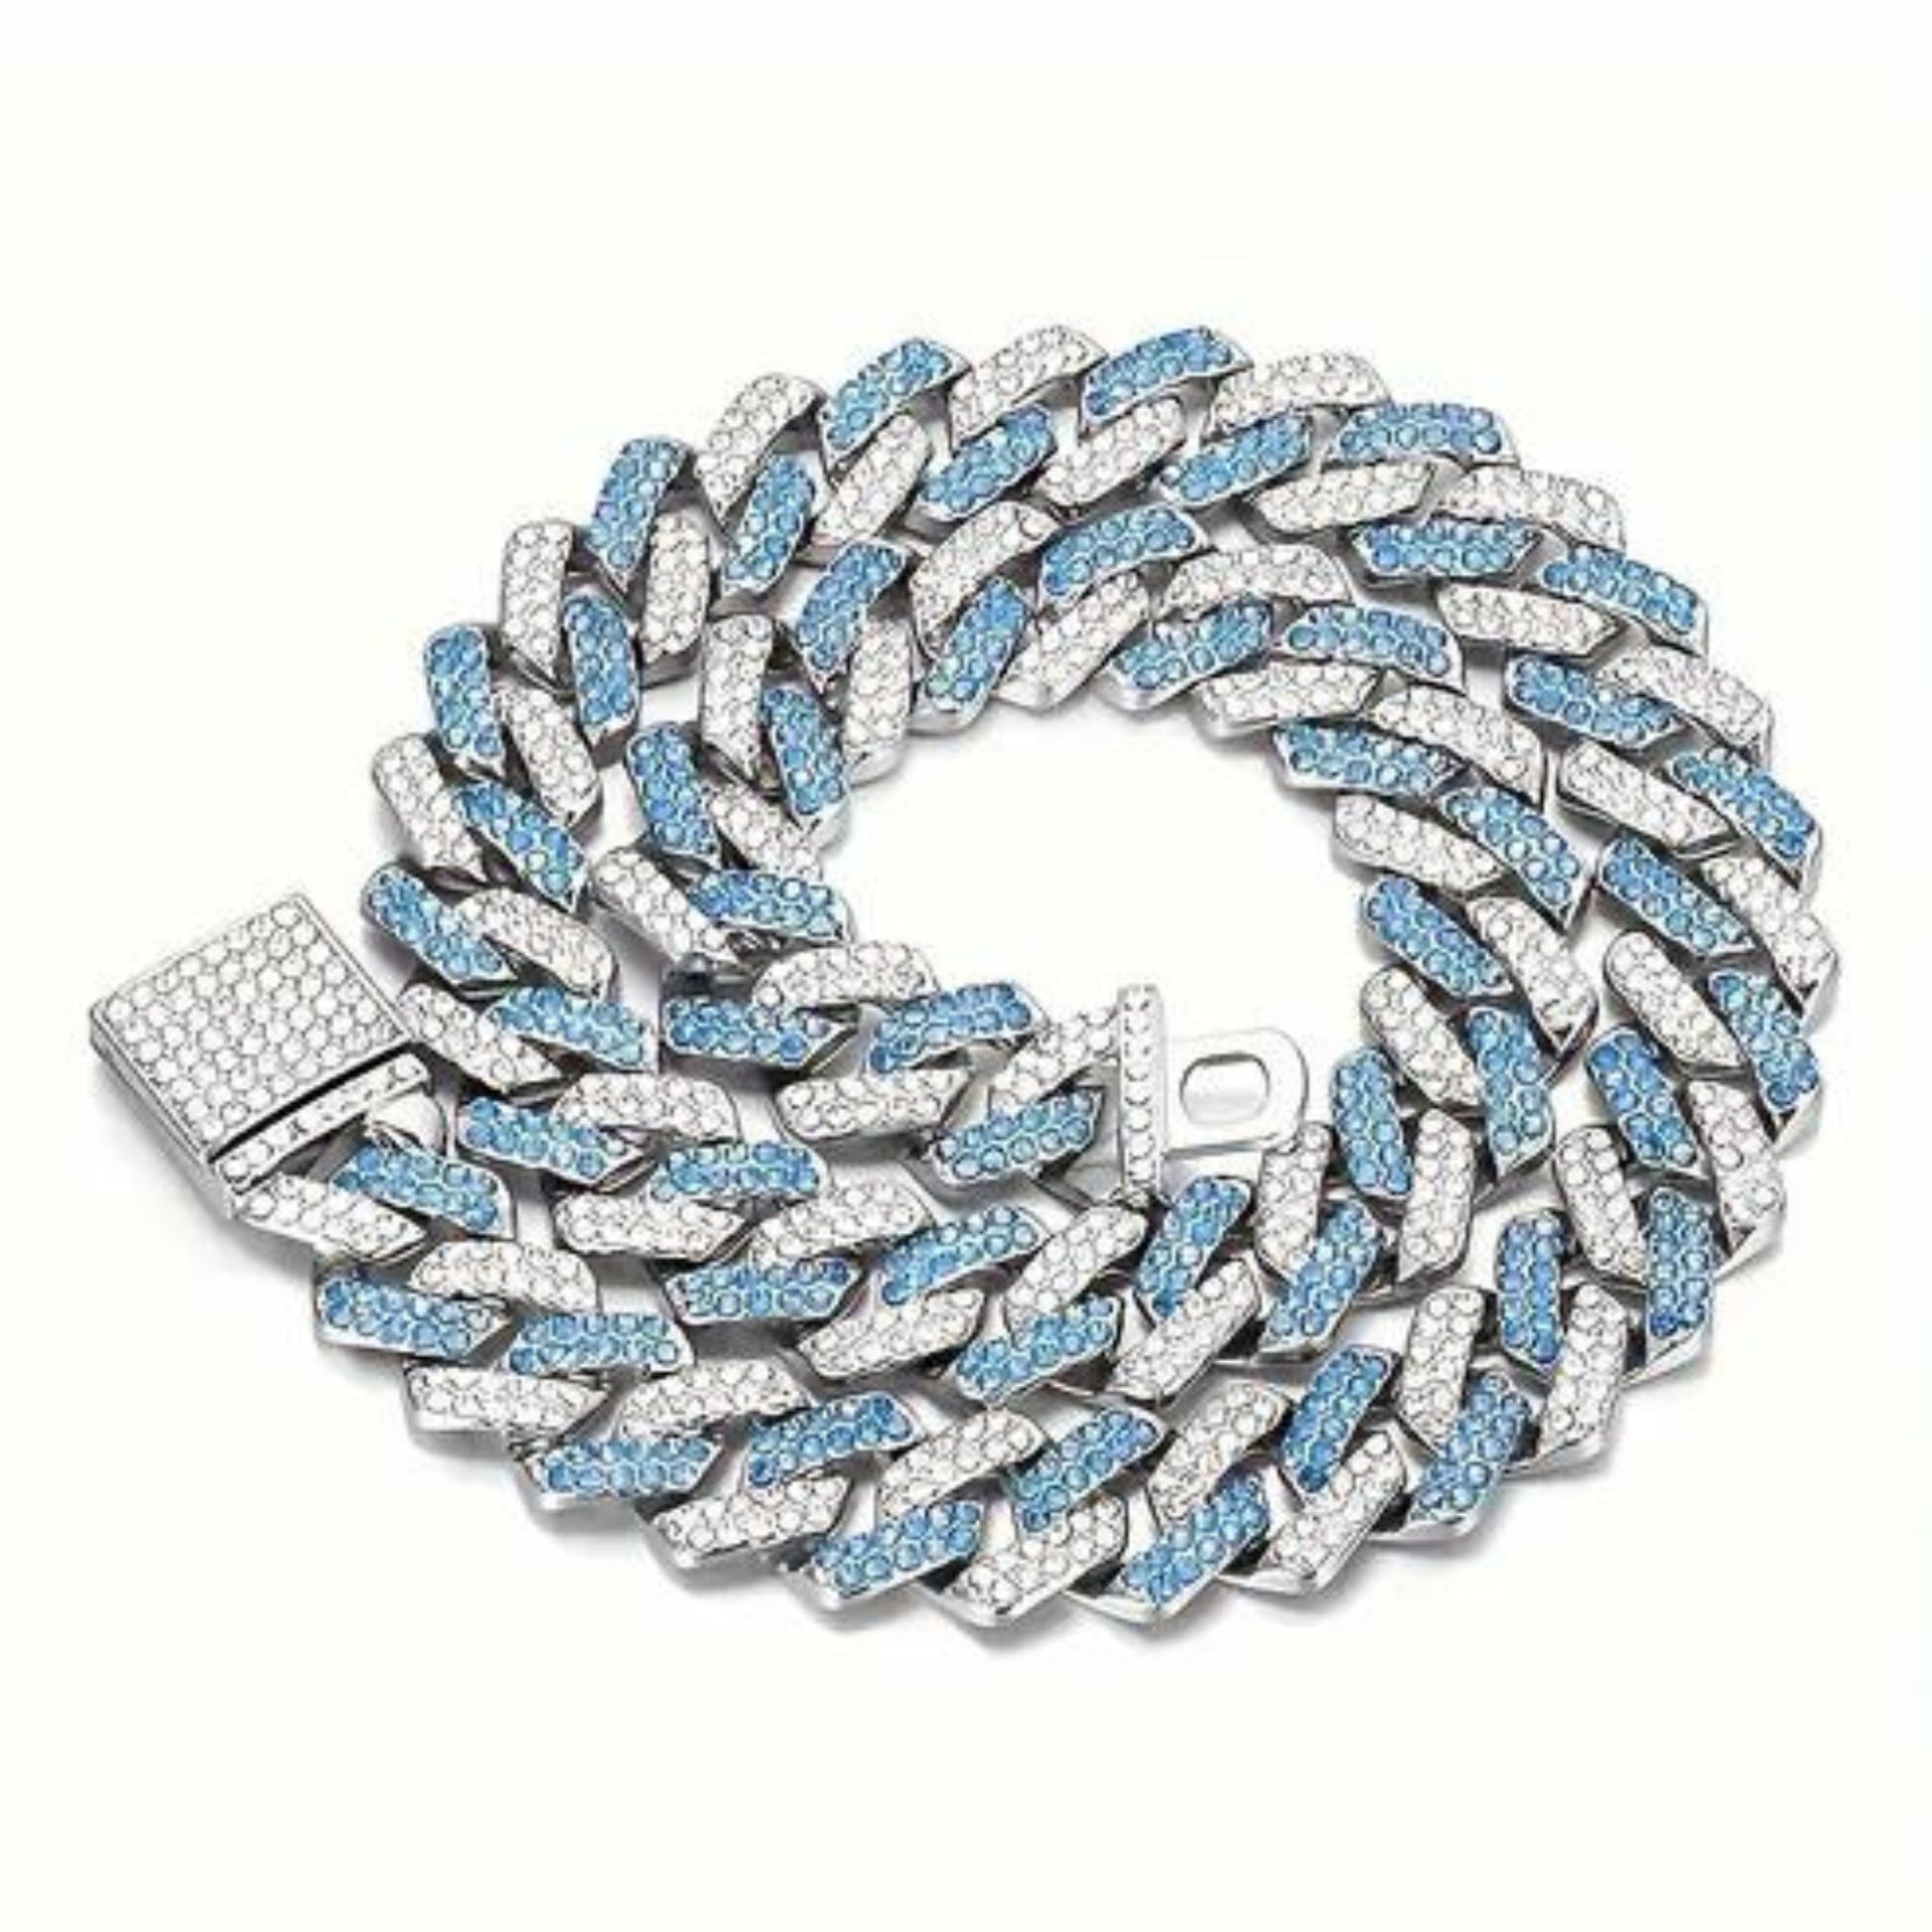 a chain with silver and blue stones on it